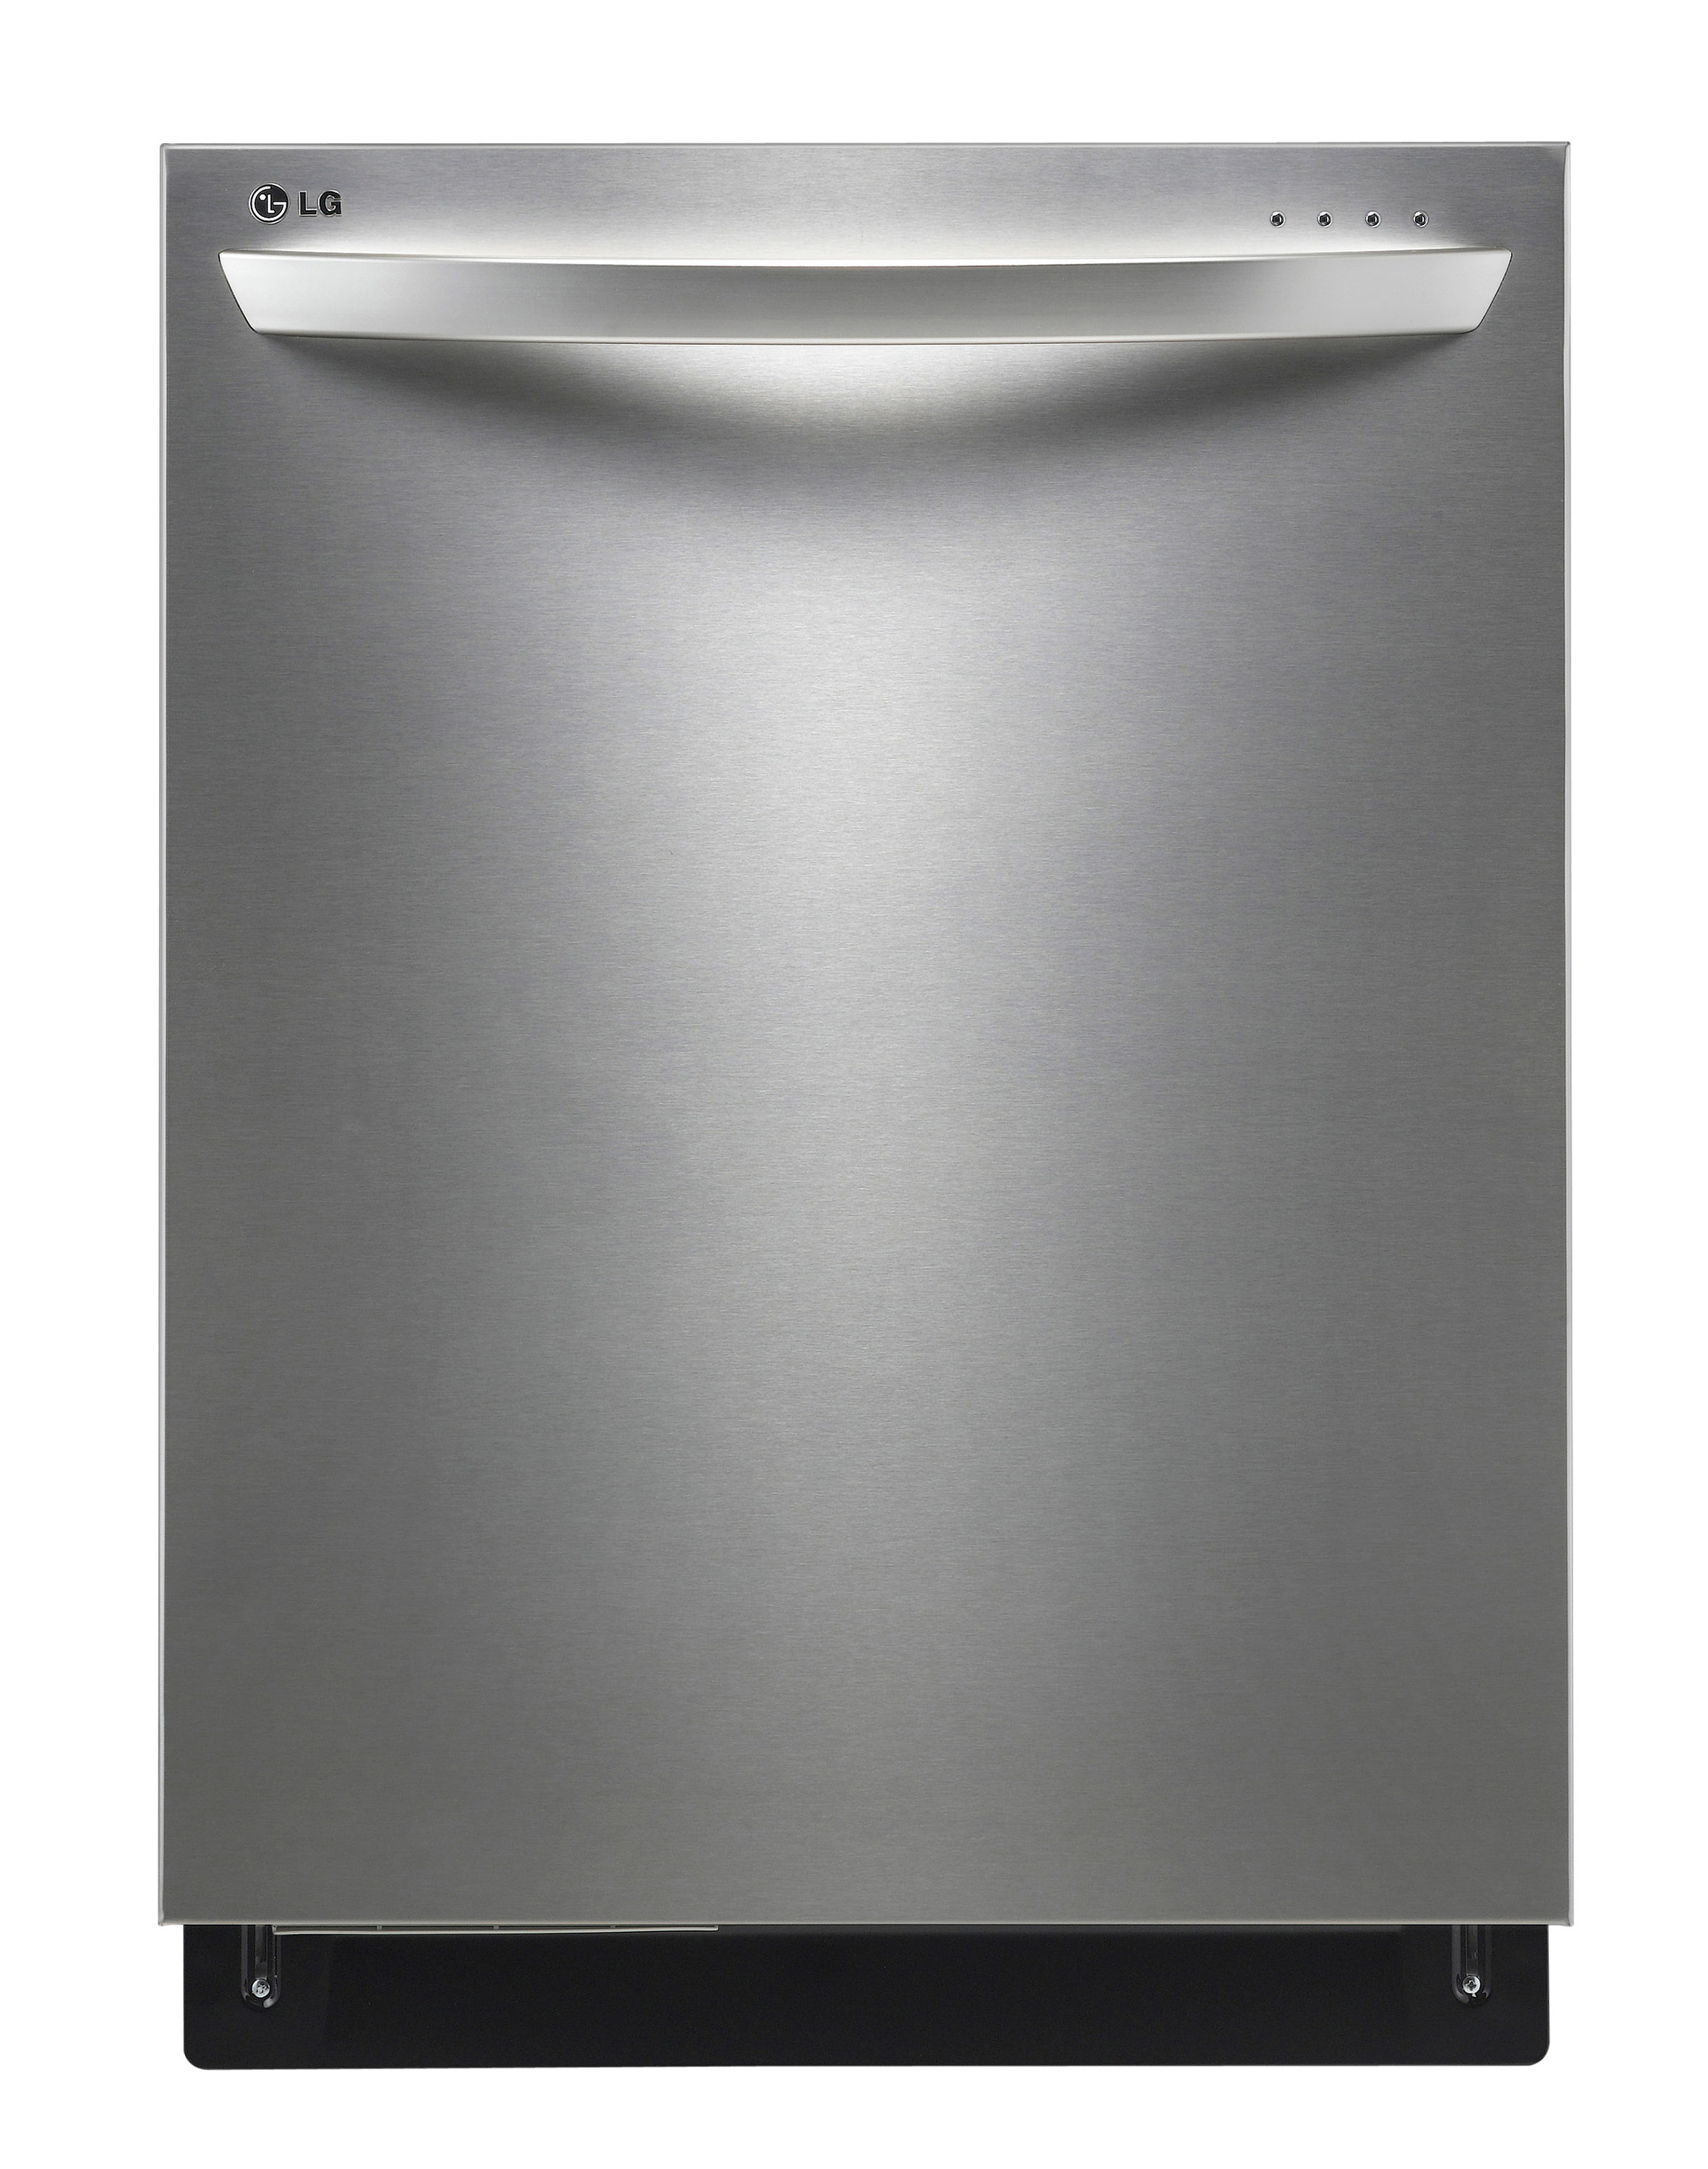 Lg LDF8874ST 24 Inch Fully Integrated Dishwasher with 15Place Settings, 6 Cycles, TrueSteam